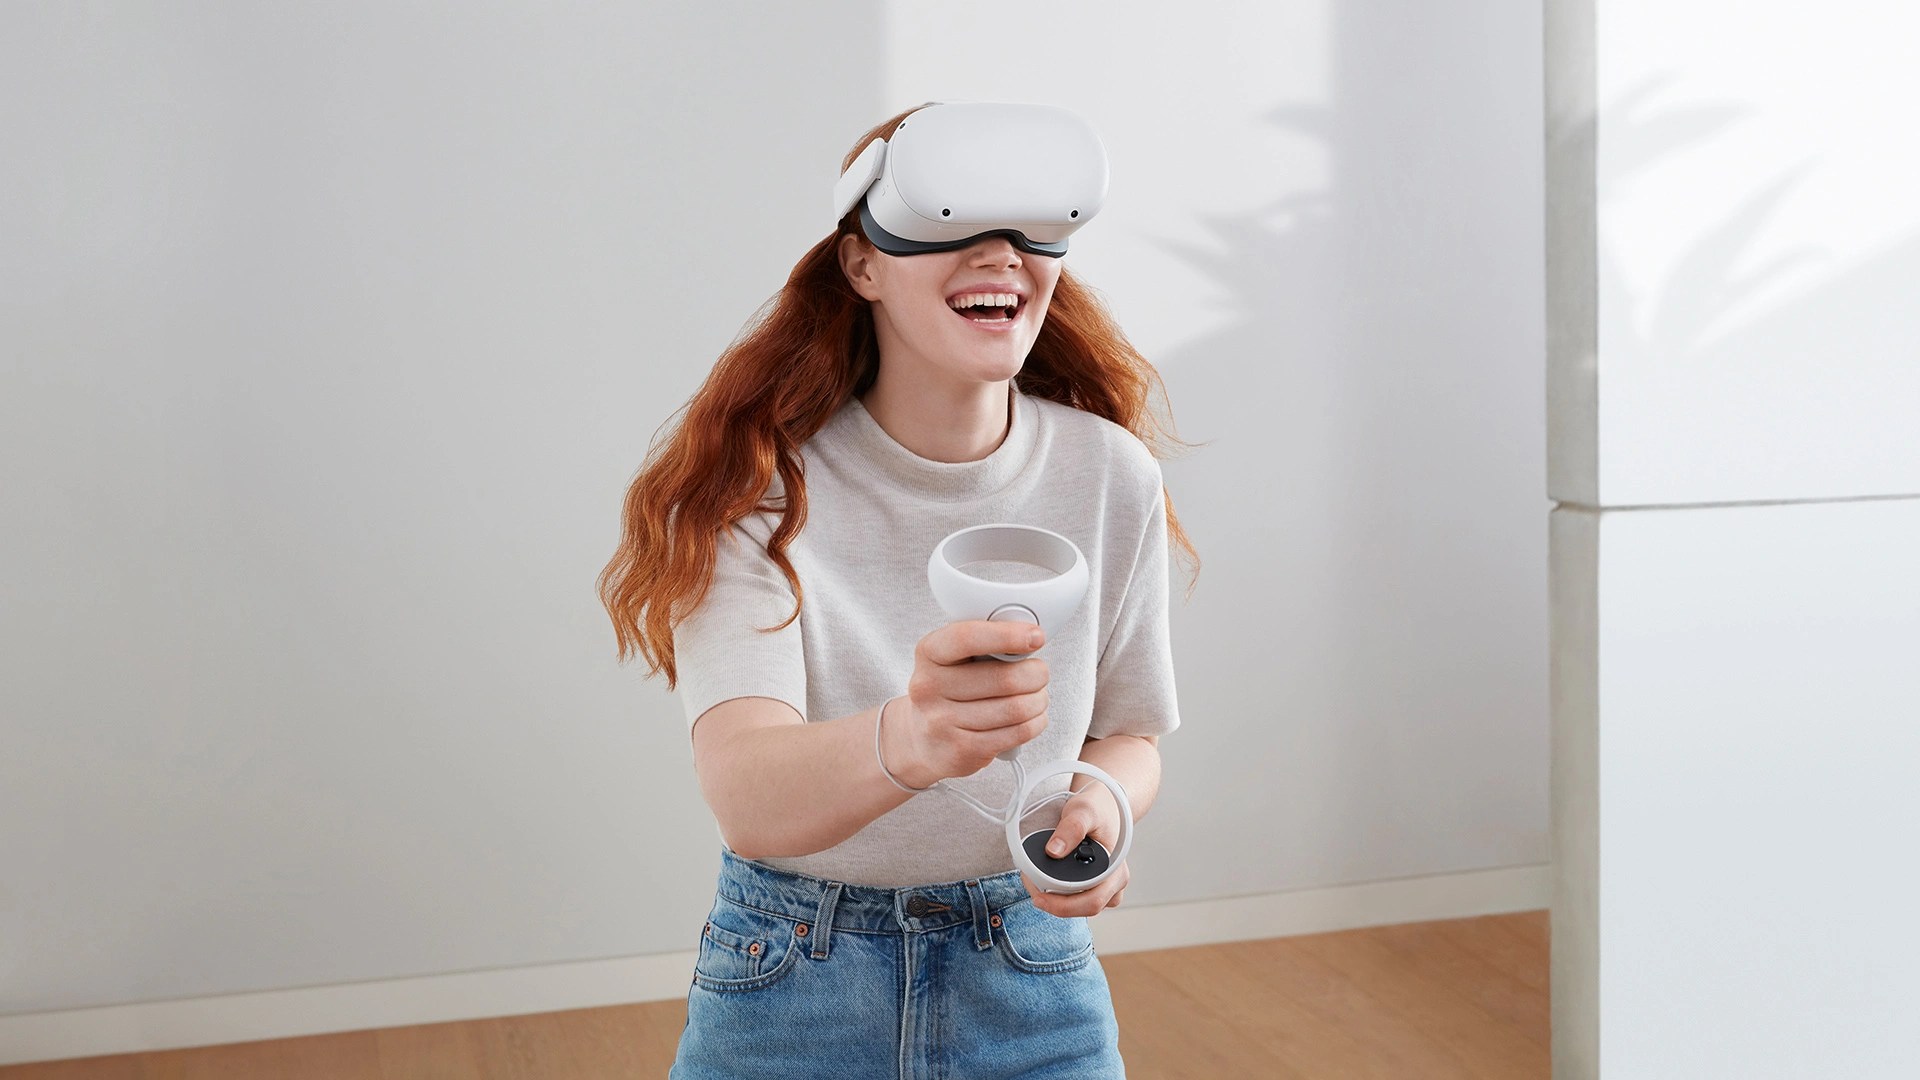 Photo of a woman using Oculus Quest 2